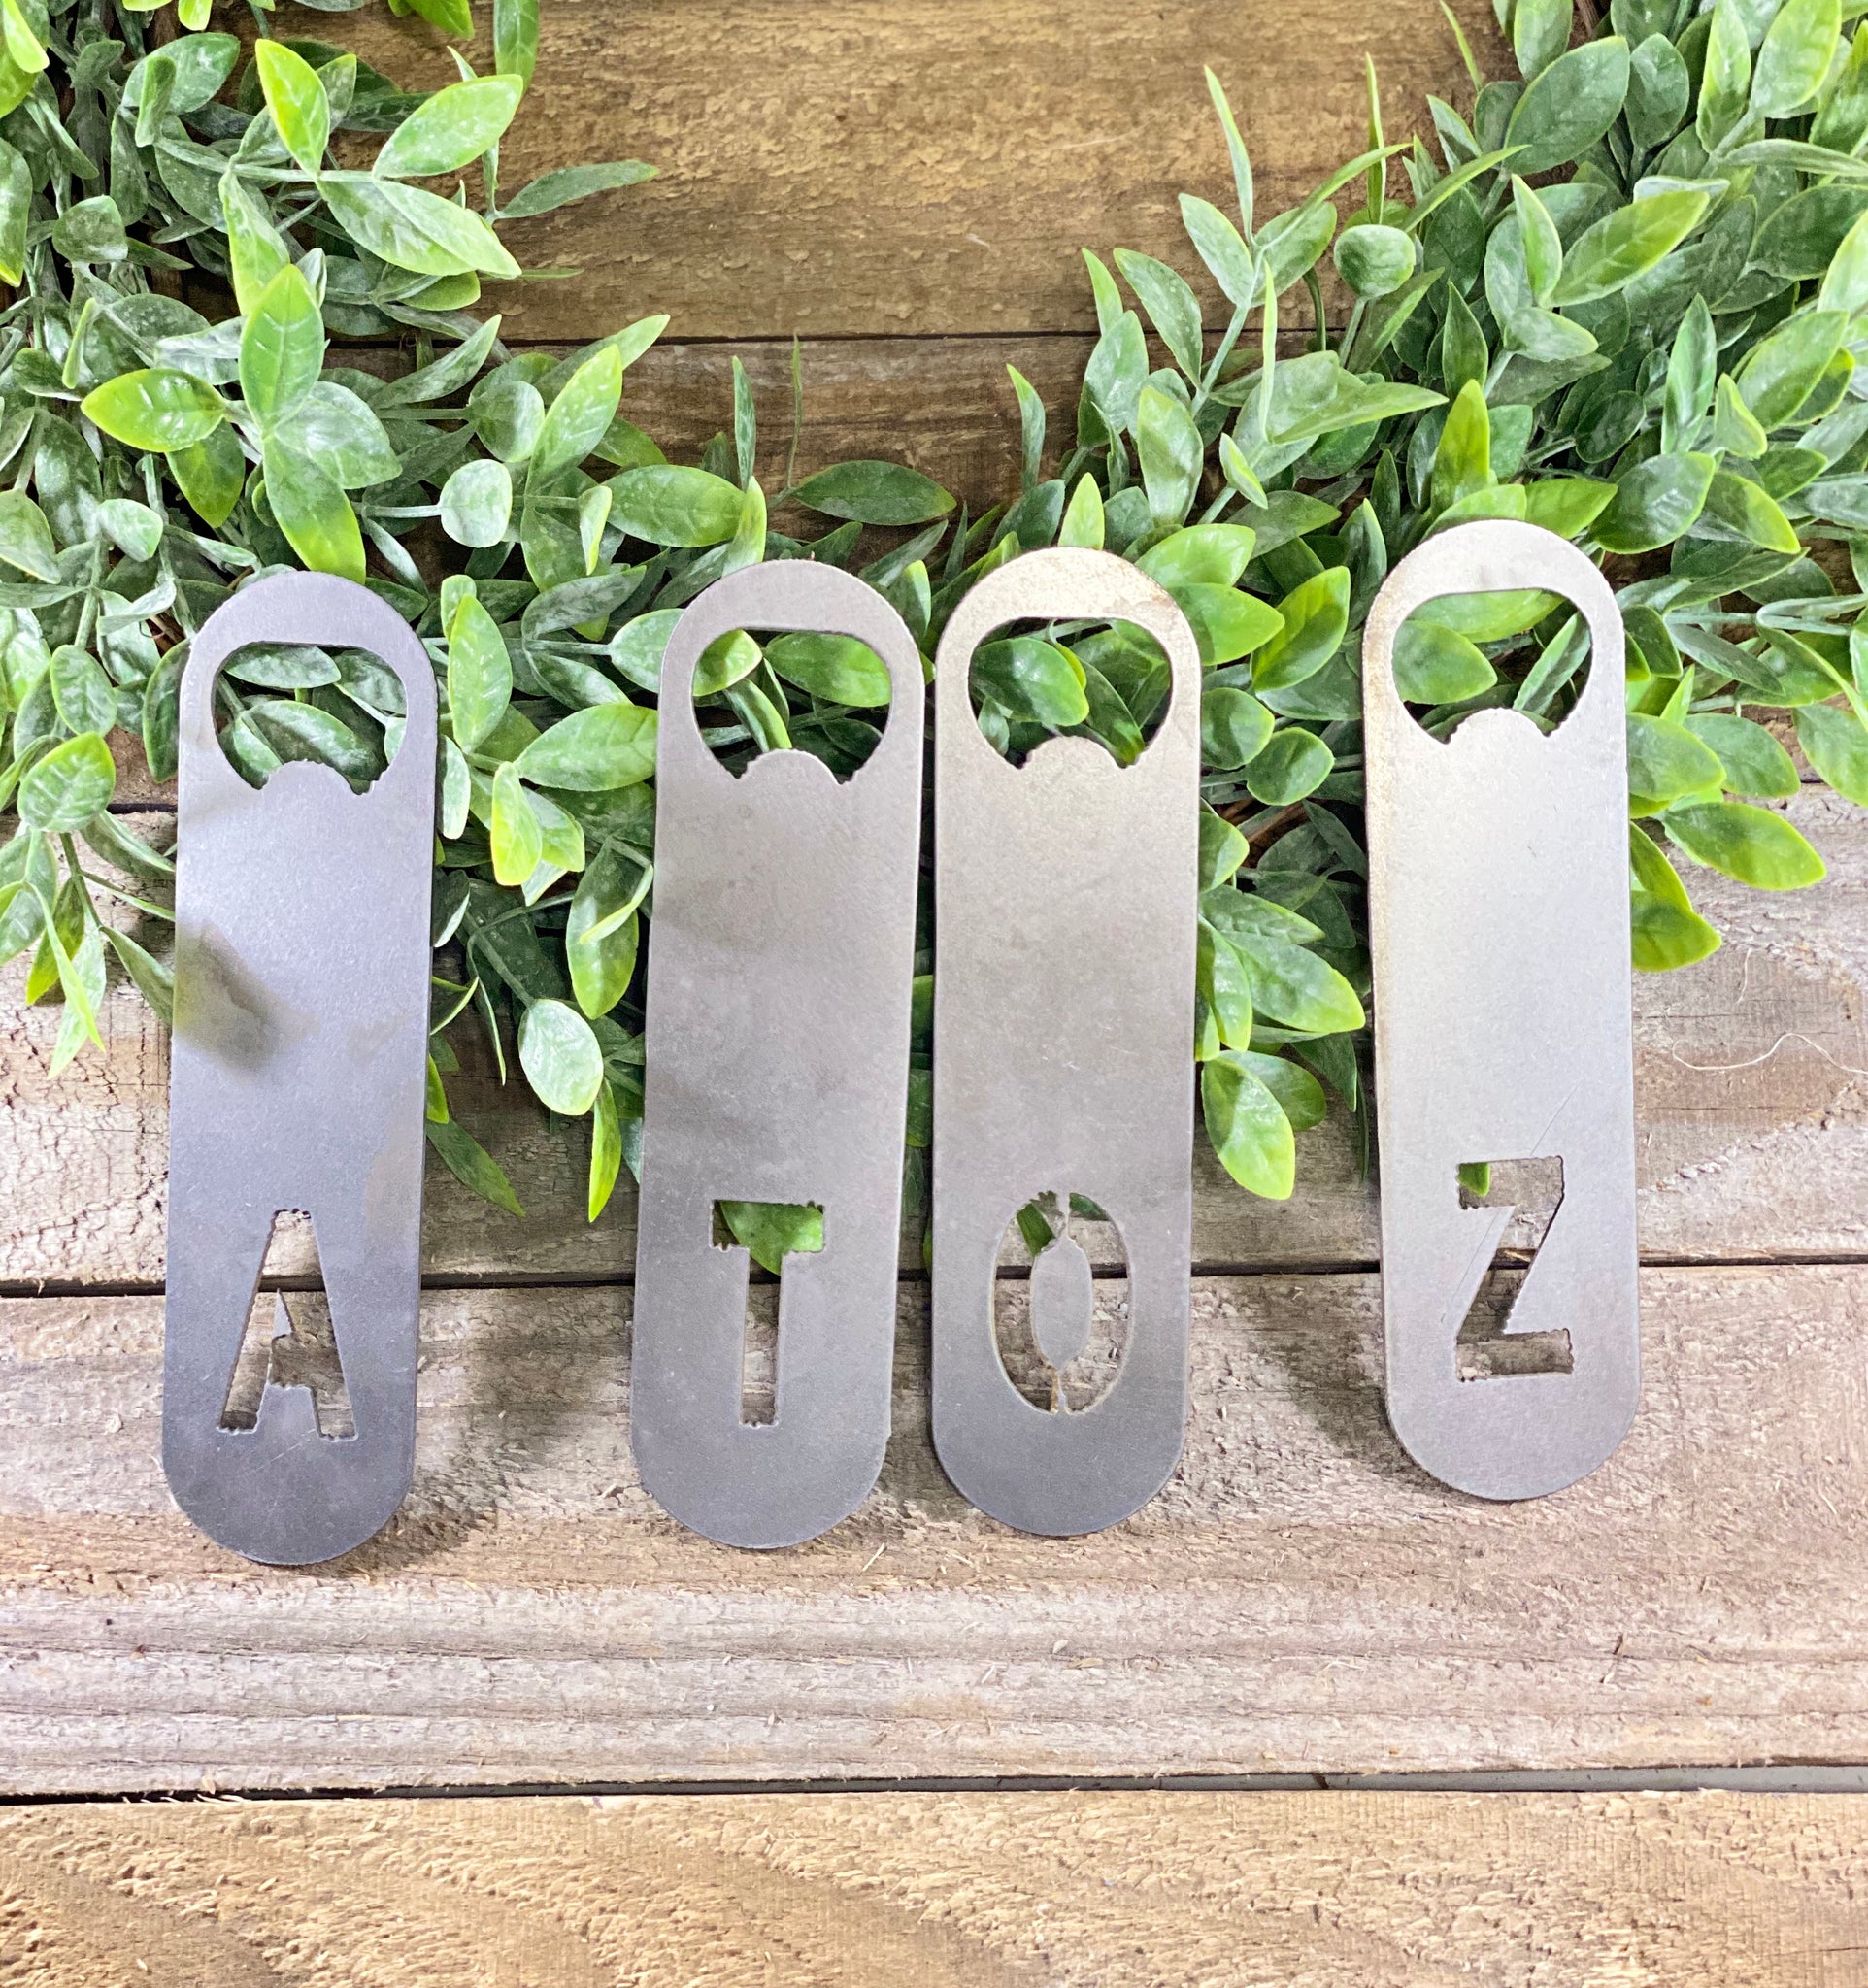 Customized Name Can Kooler Holder with Bottle Opener – Texas Metal Makers